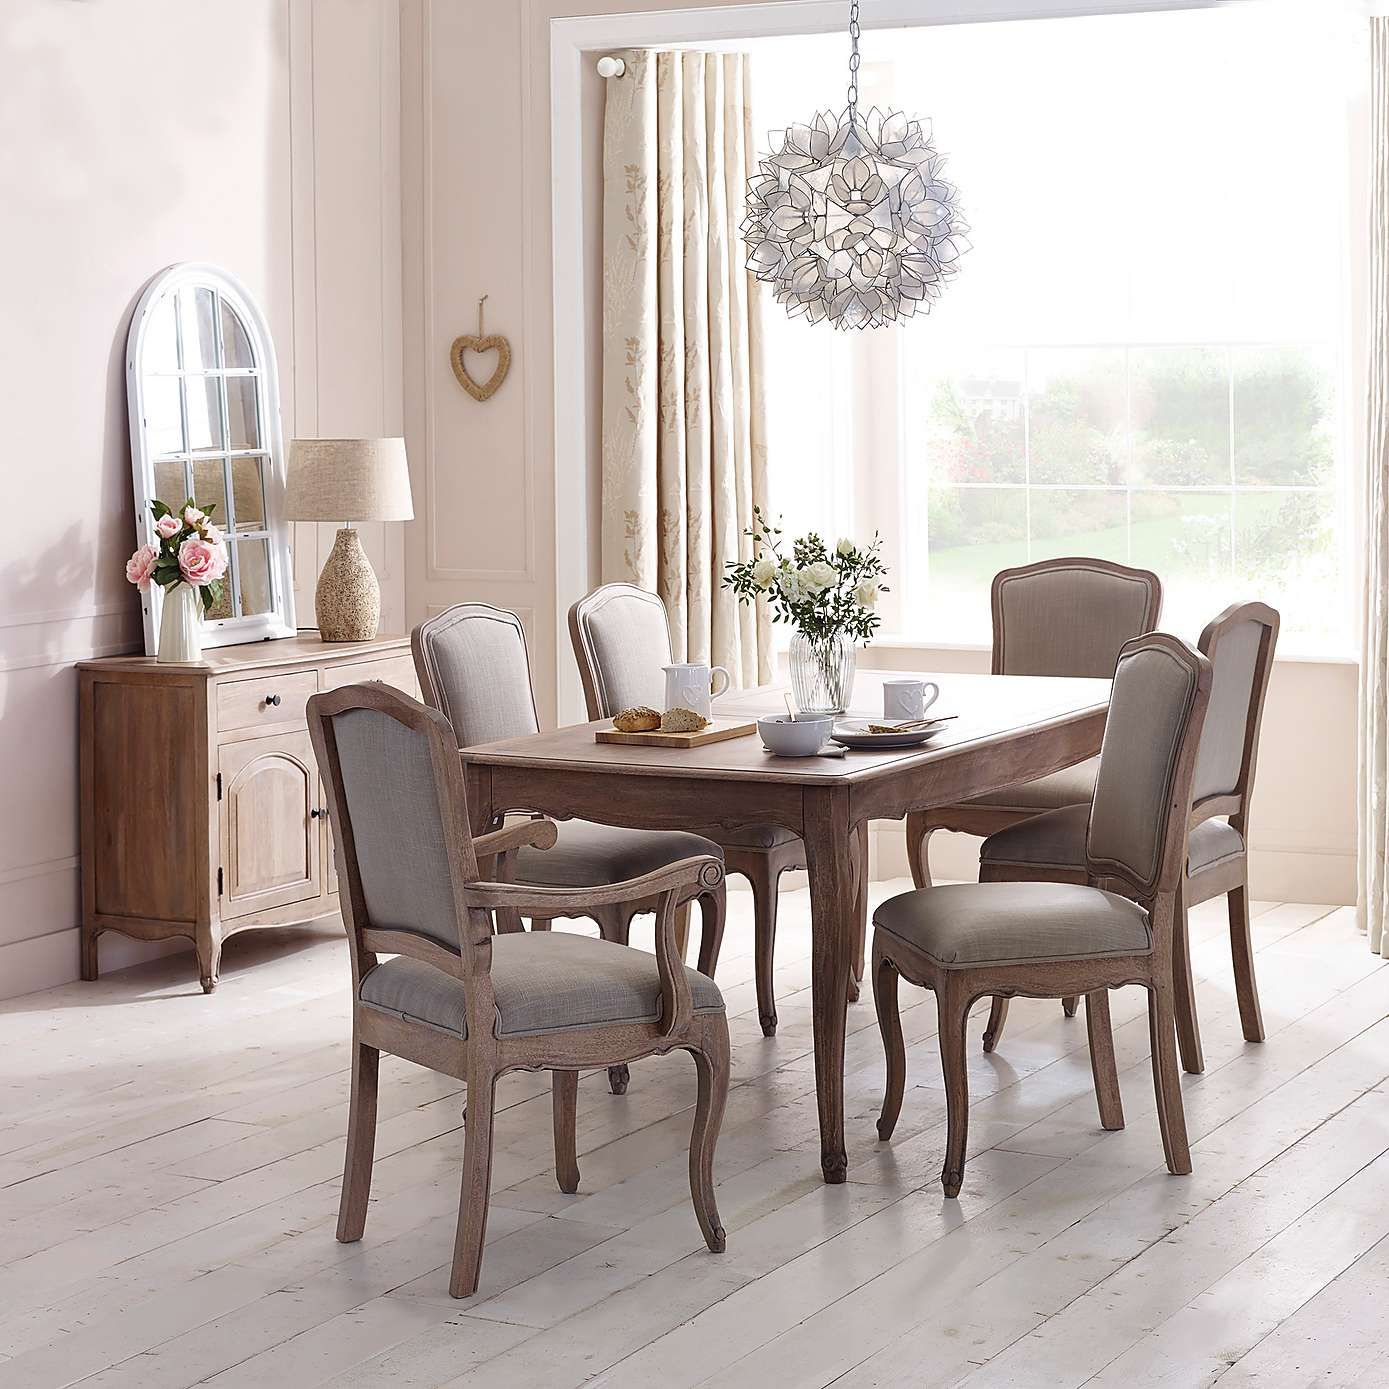 Amelie Extending Dining Table Beauchamp House Extendable pertaining to dimensions 1389 X 1389